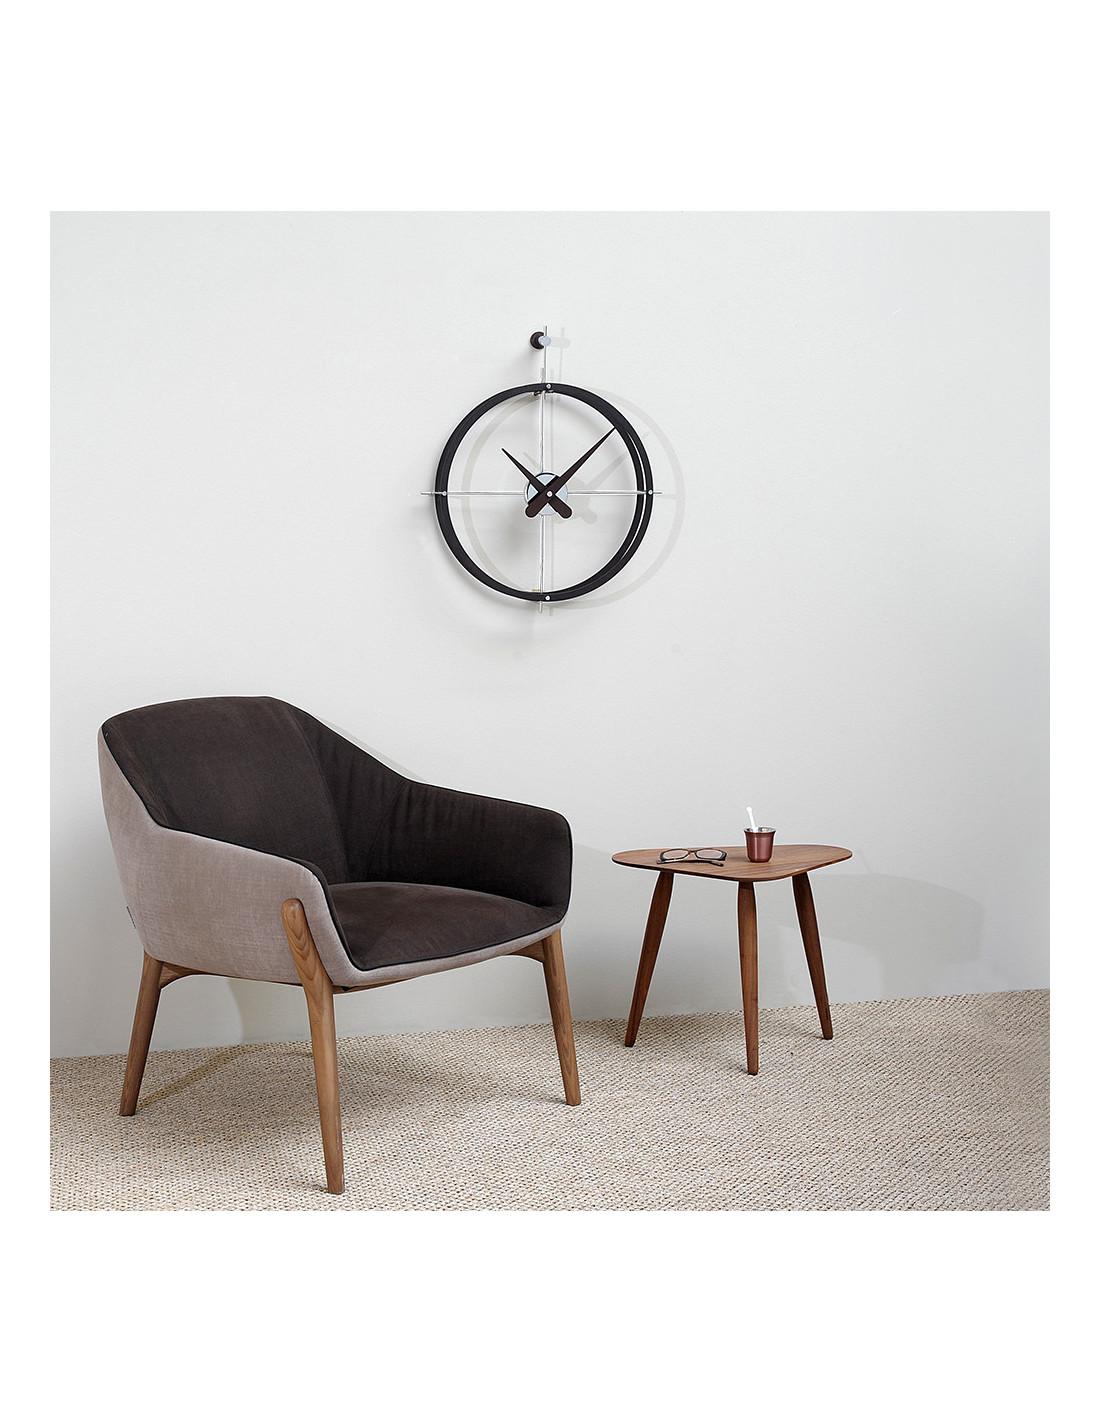 2 puntos N wall clock is a wall accessory designed with the highest quality materials. It is made of chromed steel and fine wood. 2 puntos N wall clock has a German UST mechanism 
2 puntos N wall clock : Chrome and Wood
Not ok for outdoor